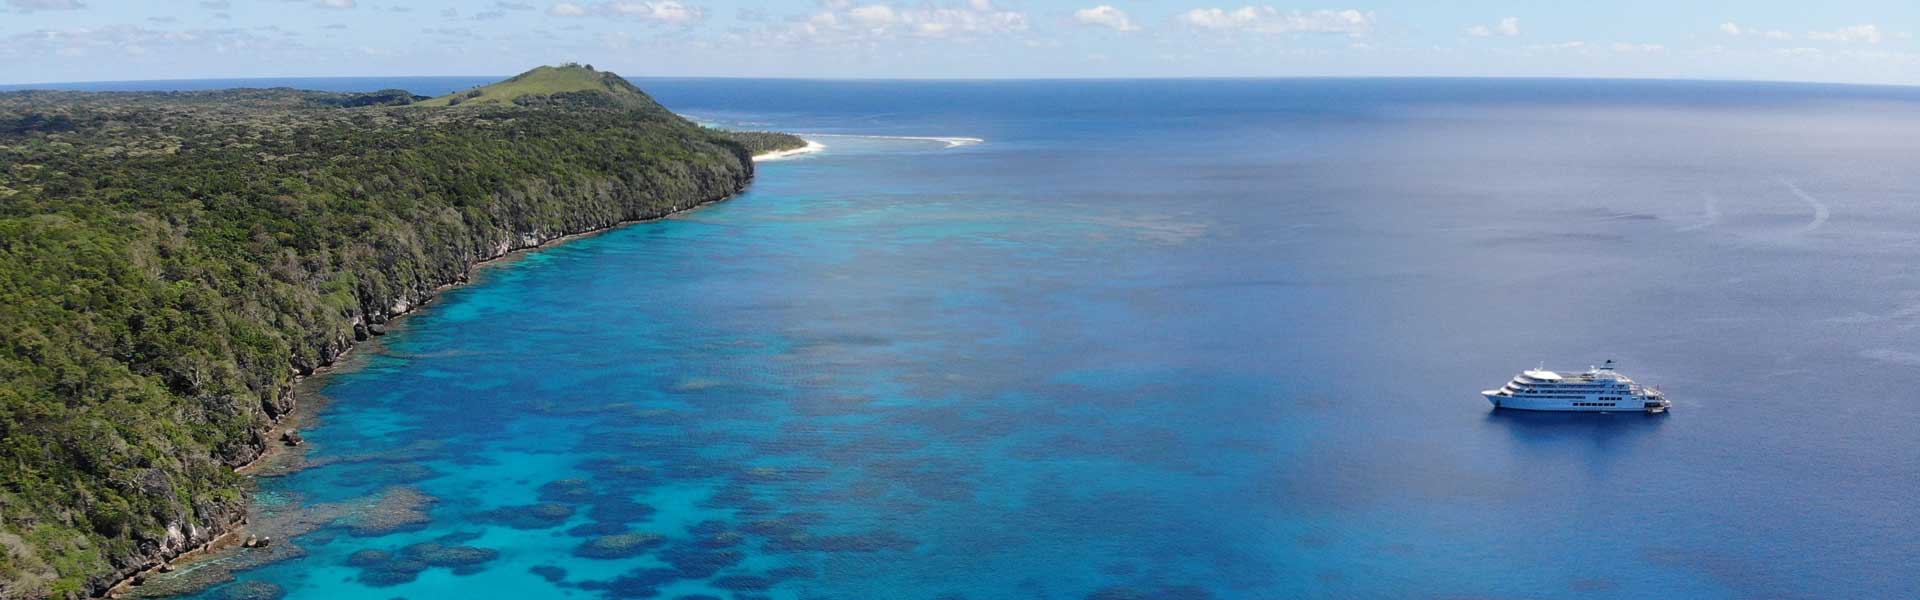 9 Nights Package for Two (7 Nights Lau & Kadavu Discovery Cruise) with Flights, Transfers and More!